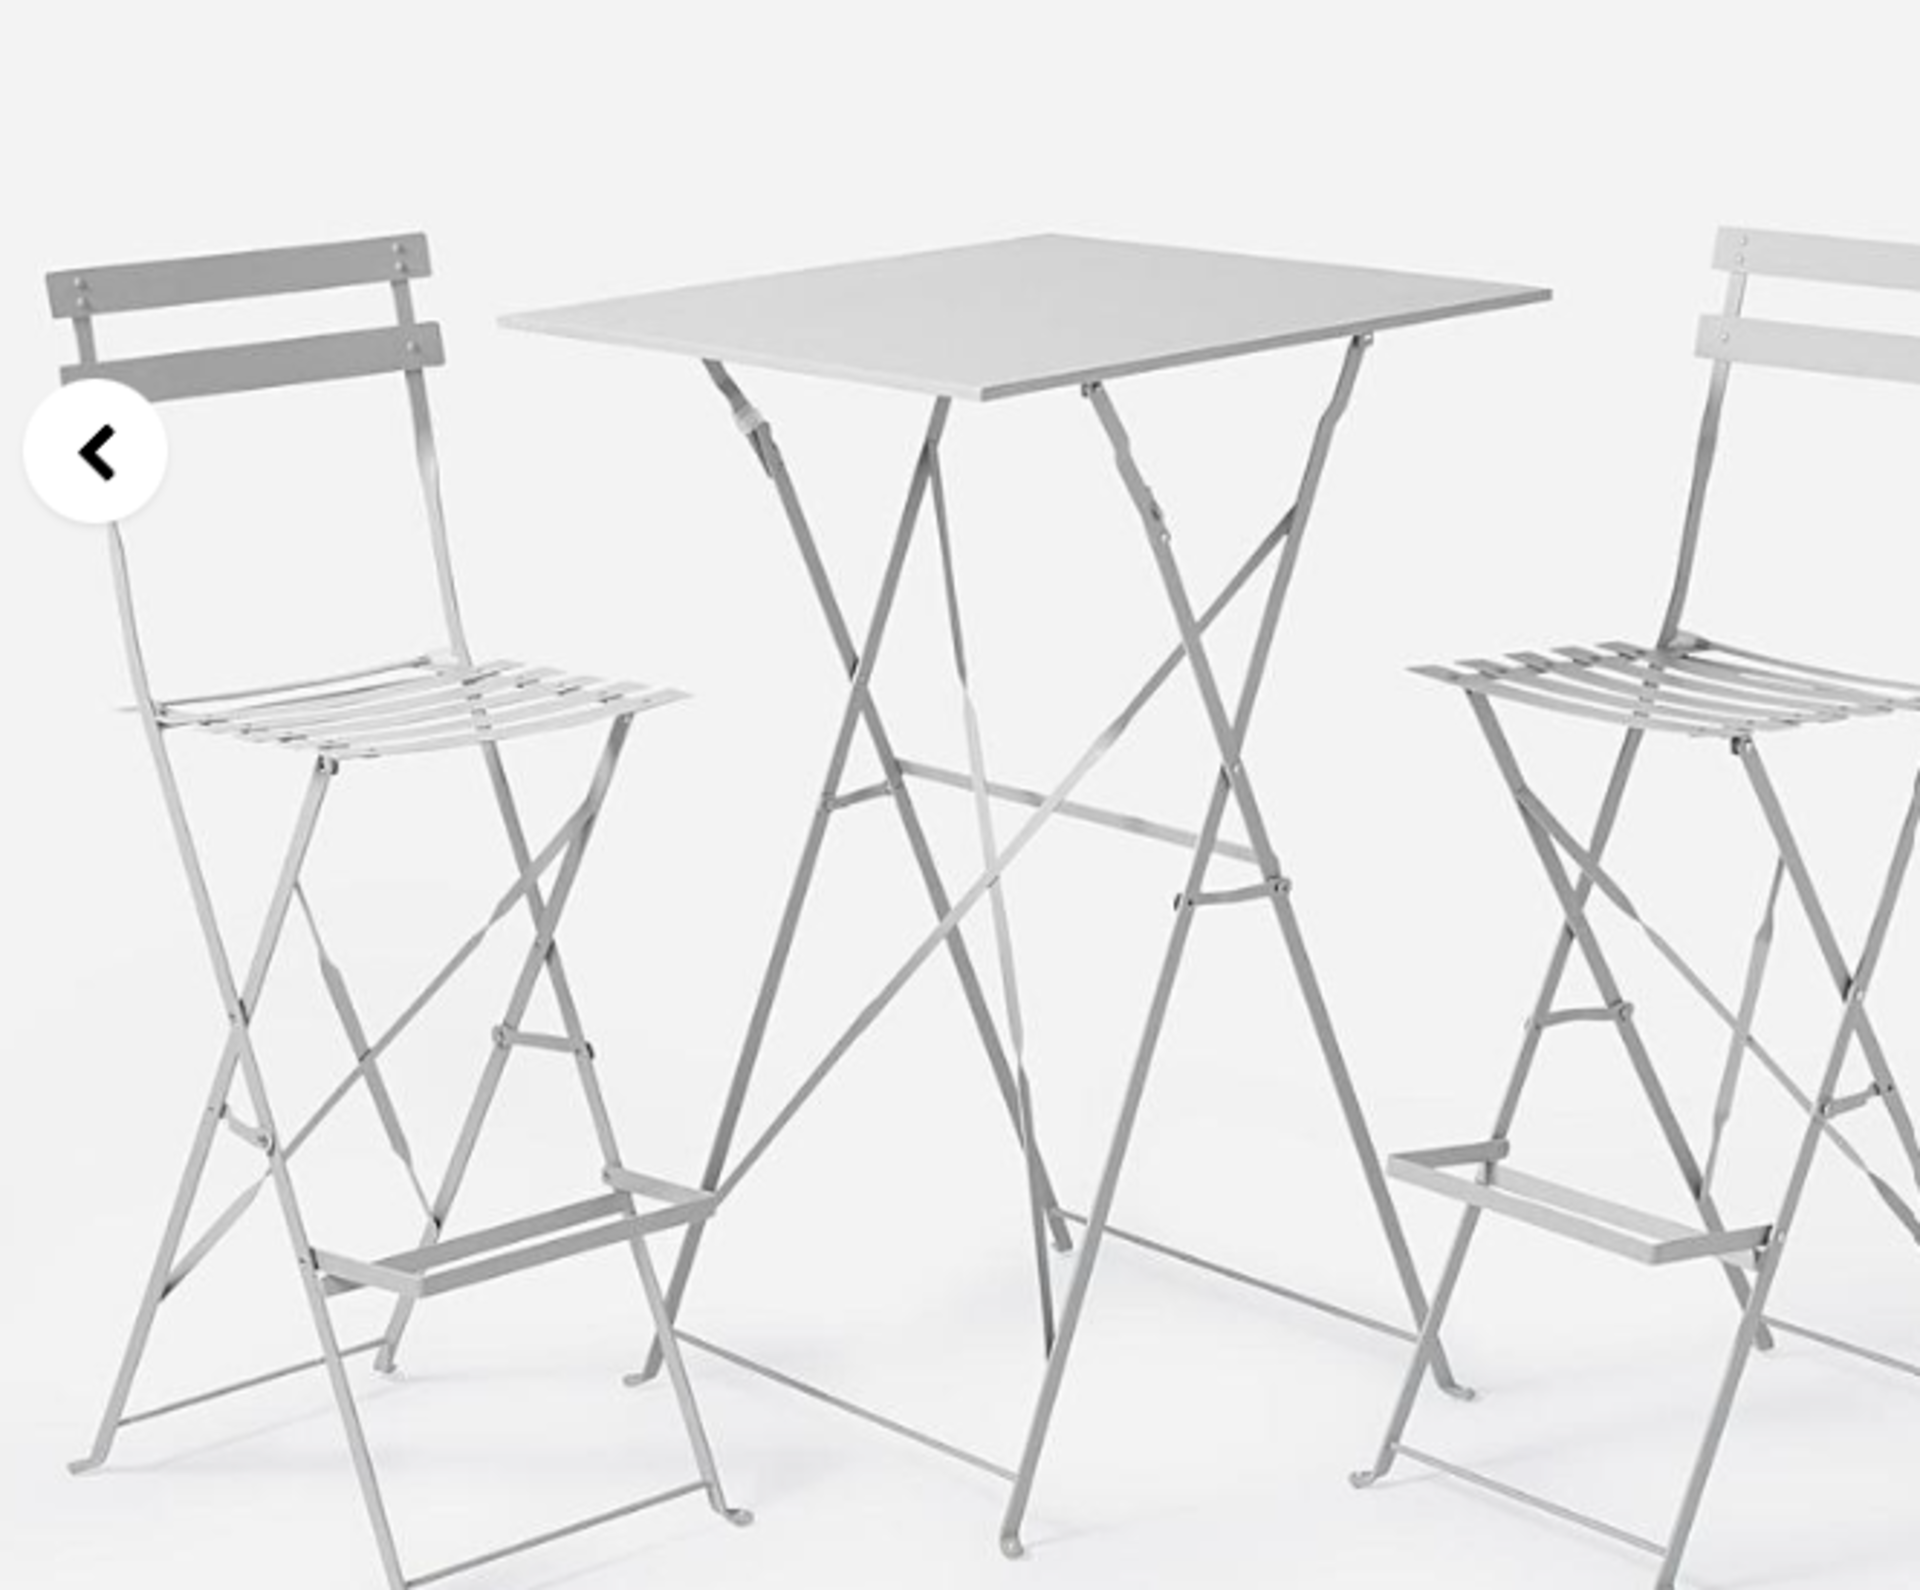 BRAND NEW Palma Bistro Bar Set GREY. RRP £159 EACH. Liven up your - Image 2 of 2